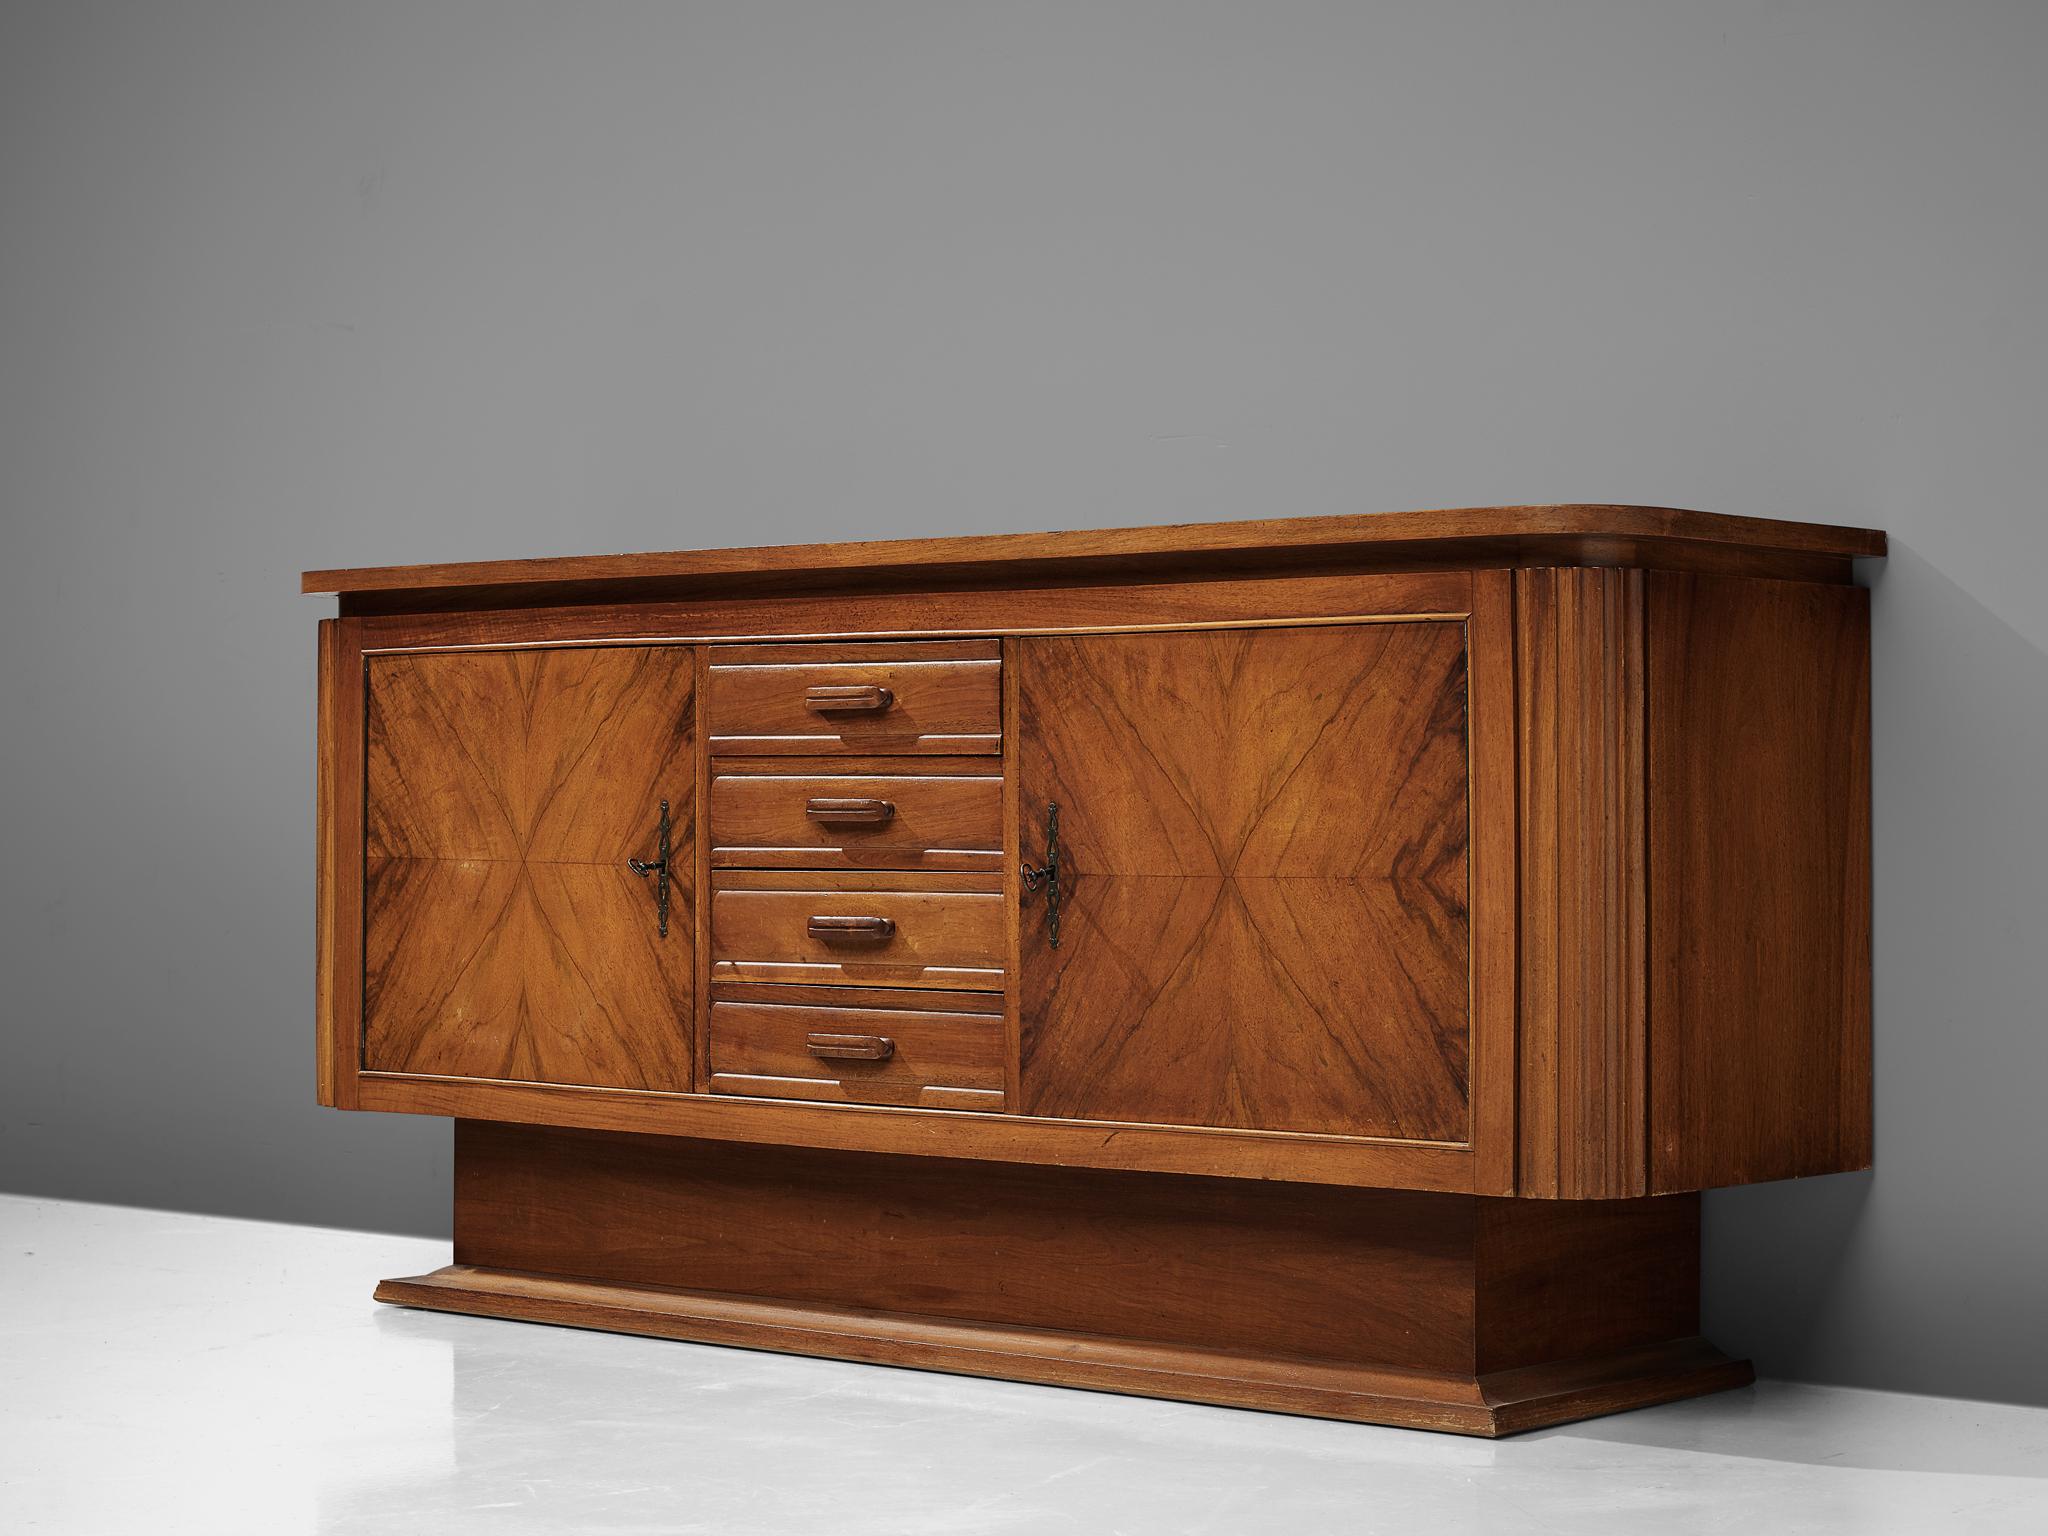 Sideboard, walnut and iron, Europe, 1950s

This sturdy pedestal sideboard features two doors and four drawers on the front. The doors are finished with bookmatched veneer and decorative iron locks. The corners are rounded and contain a structure of